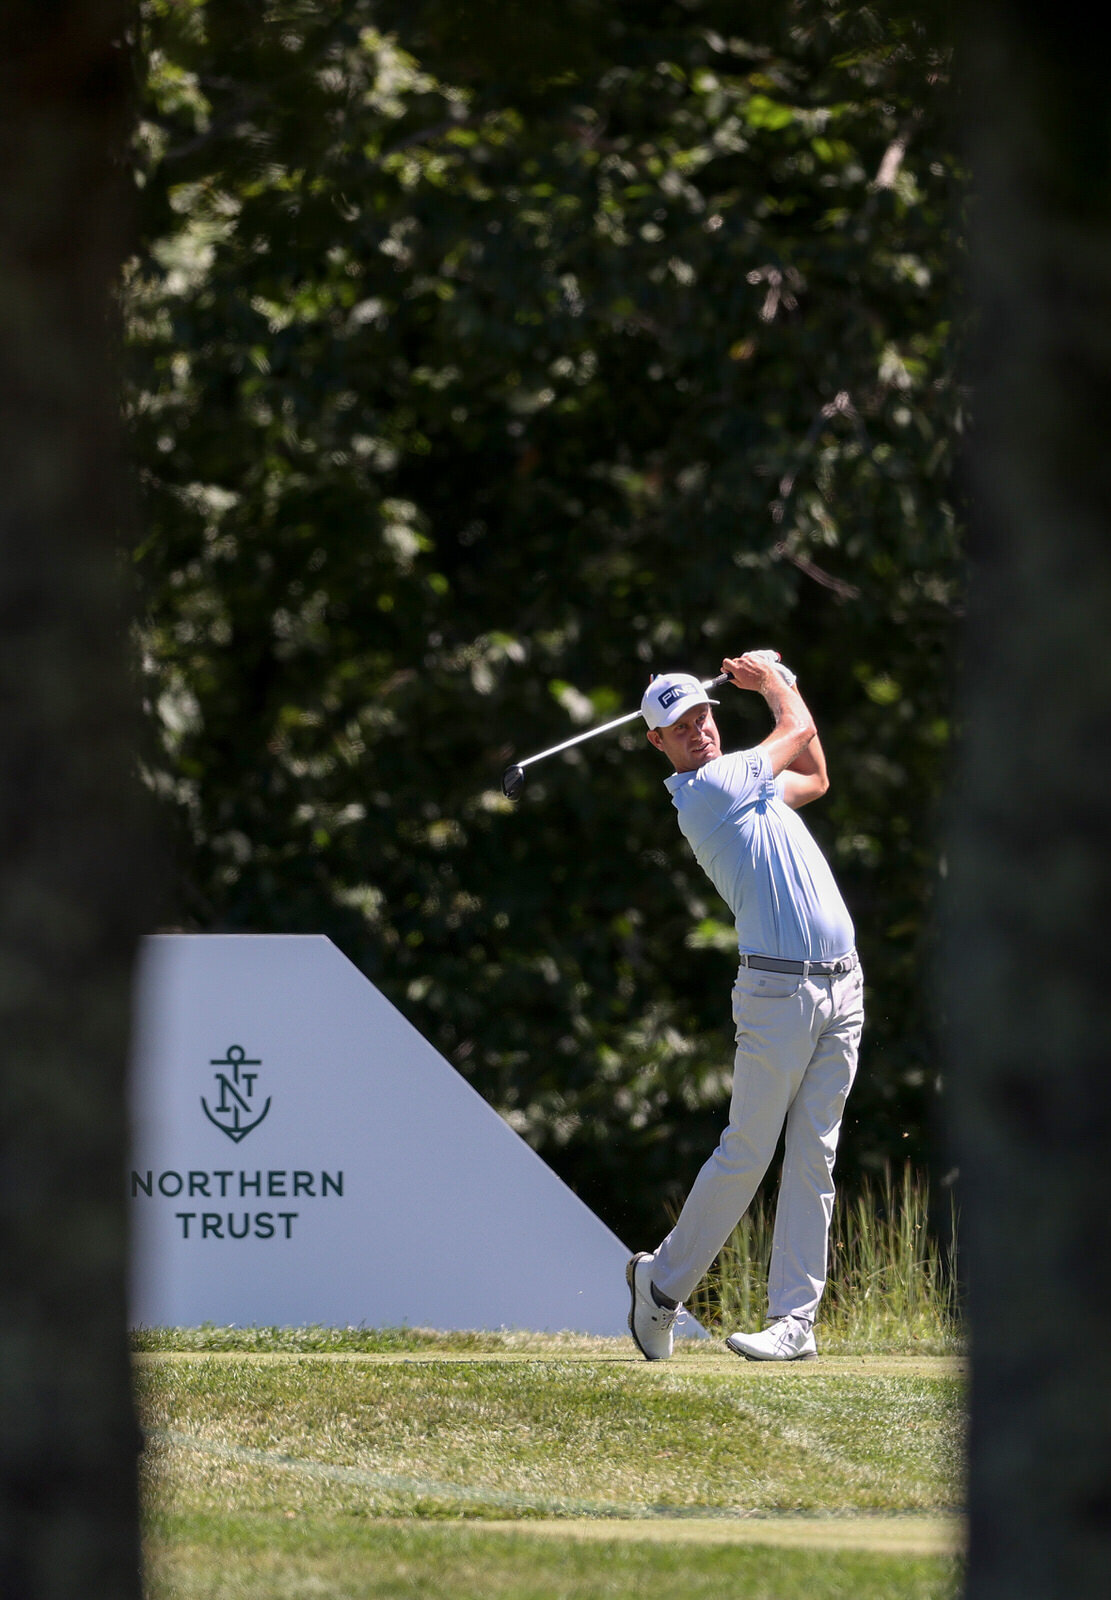  NORTON, MASSACHUSETTS - AUGUST 20:  Harris English of the United States plays his shot from the 17th tee during the first round of The Northern Trust at TPC Boston on August 20, 2020 in Norton, Massachusetts. (Photo by Rob Carr/Getty Images) 